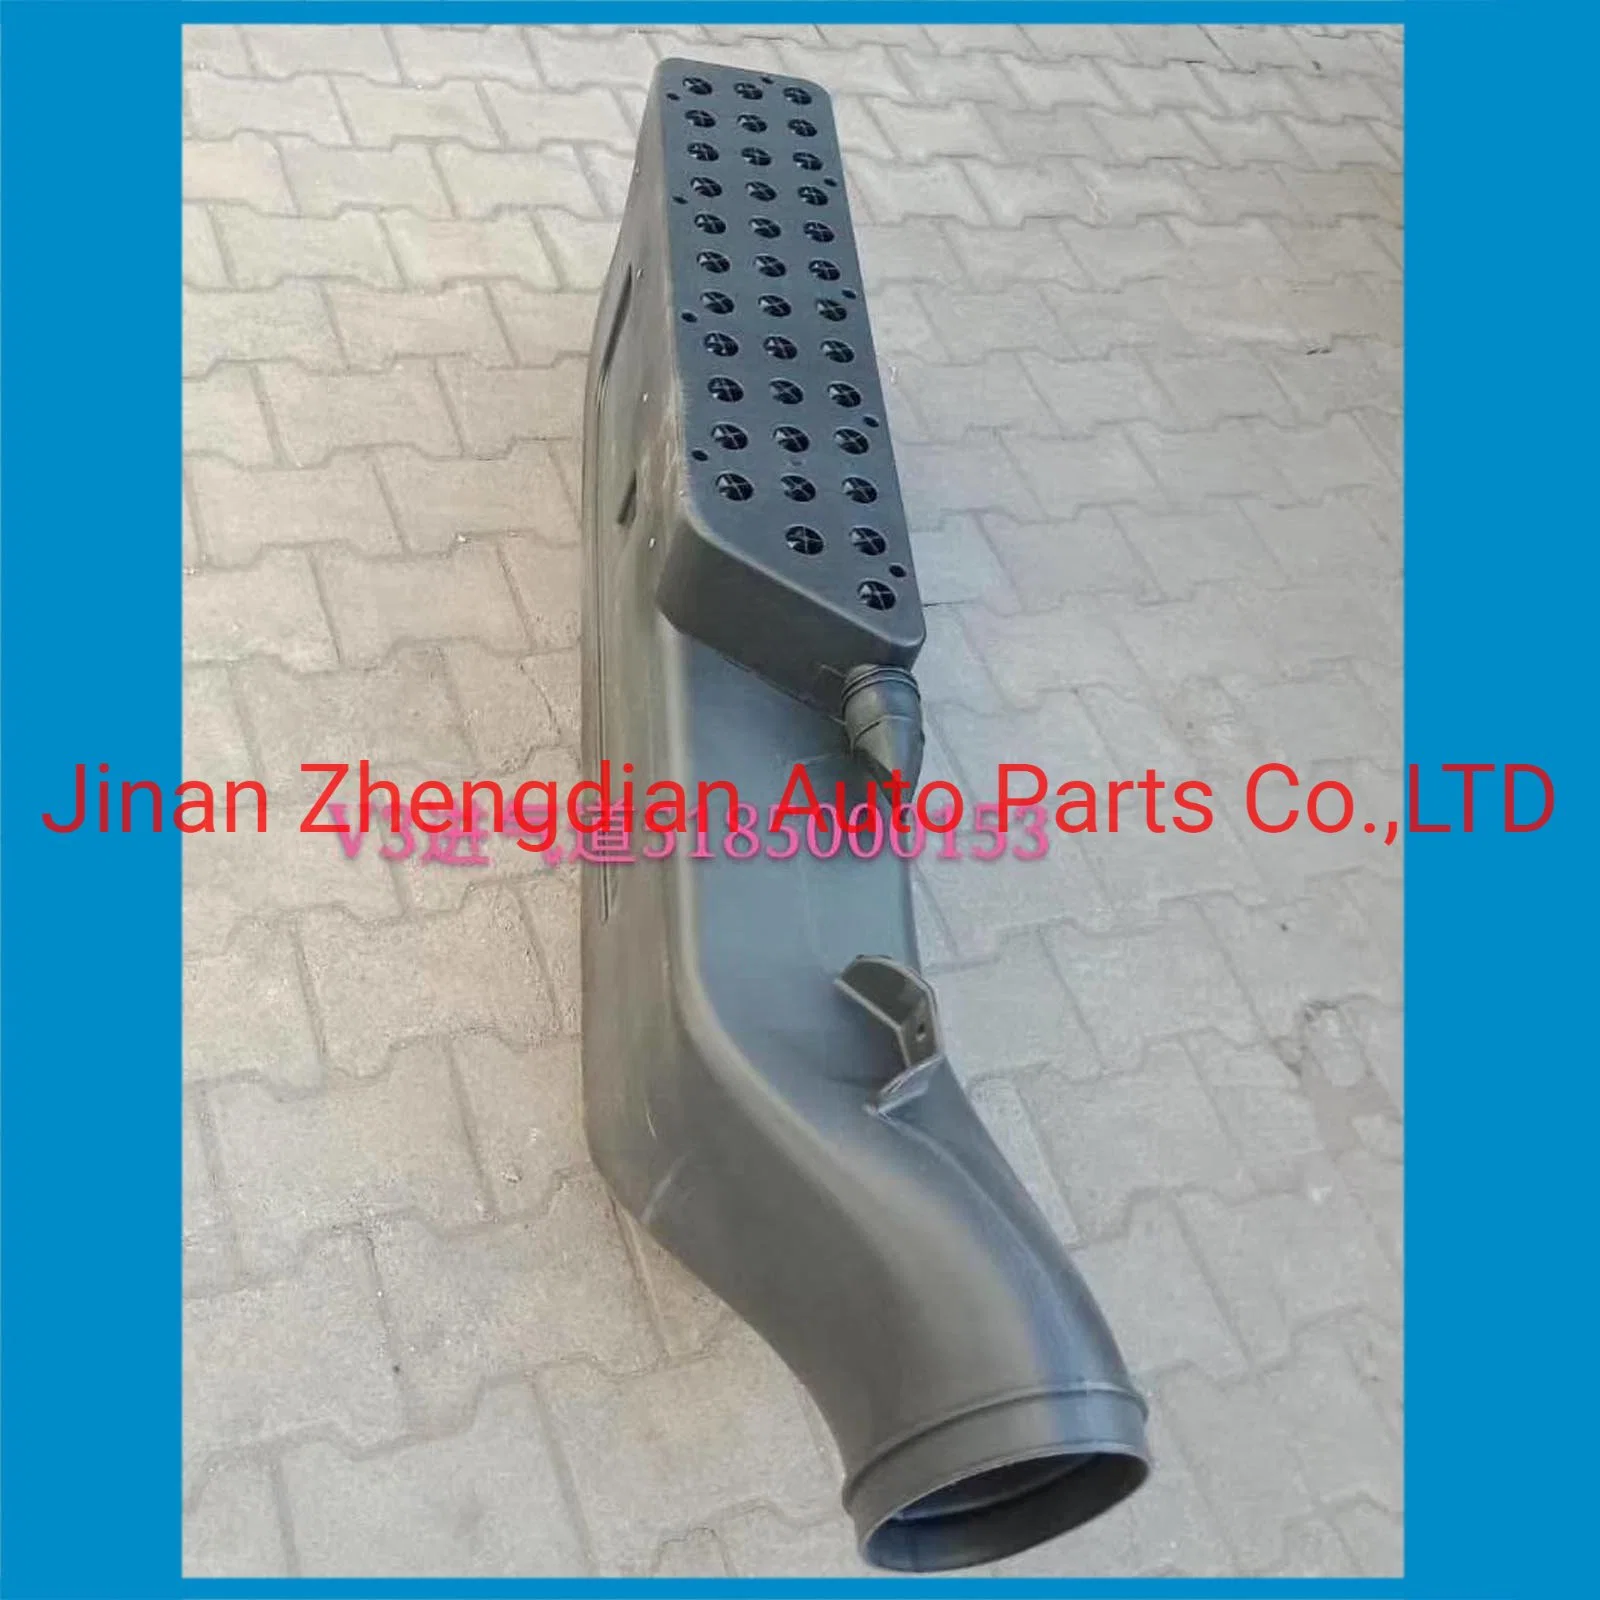 8135200753 Auto Air Inlet Air Vent Air Intake Duct for Beiben North Benz V3et Truck Spare Parts Sinotruk HOWO Shacman FAW Foton Auman Sitrak Steyr Hongyan Camc